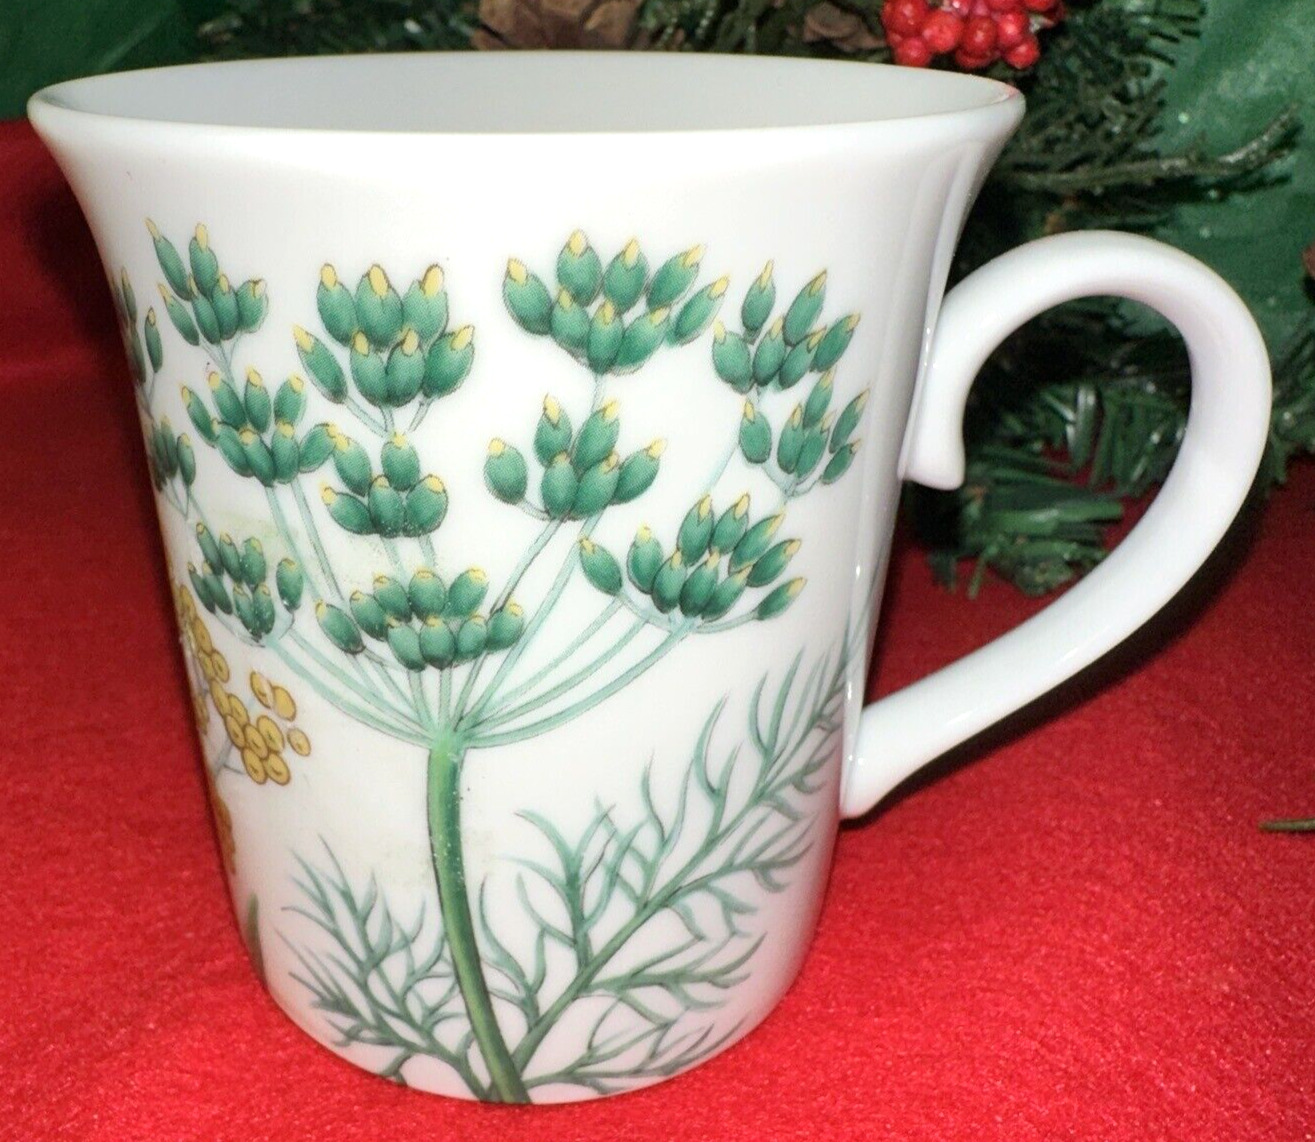 1x Horchow Ceramic Tea Cup Queen Anne\'s Lace Dill Goldenrod Pattern